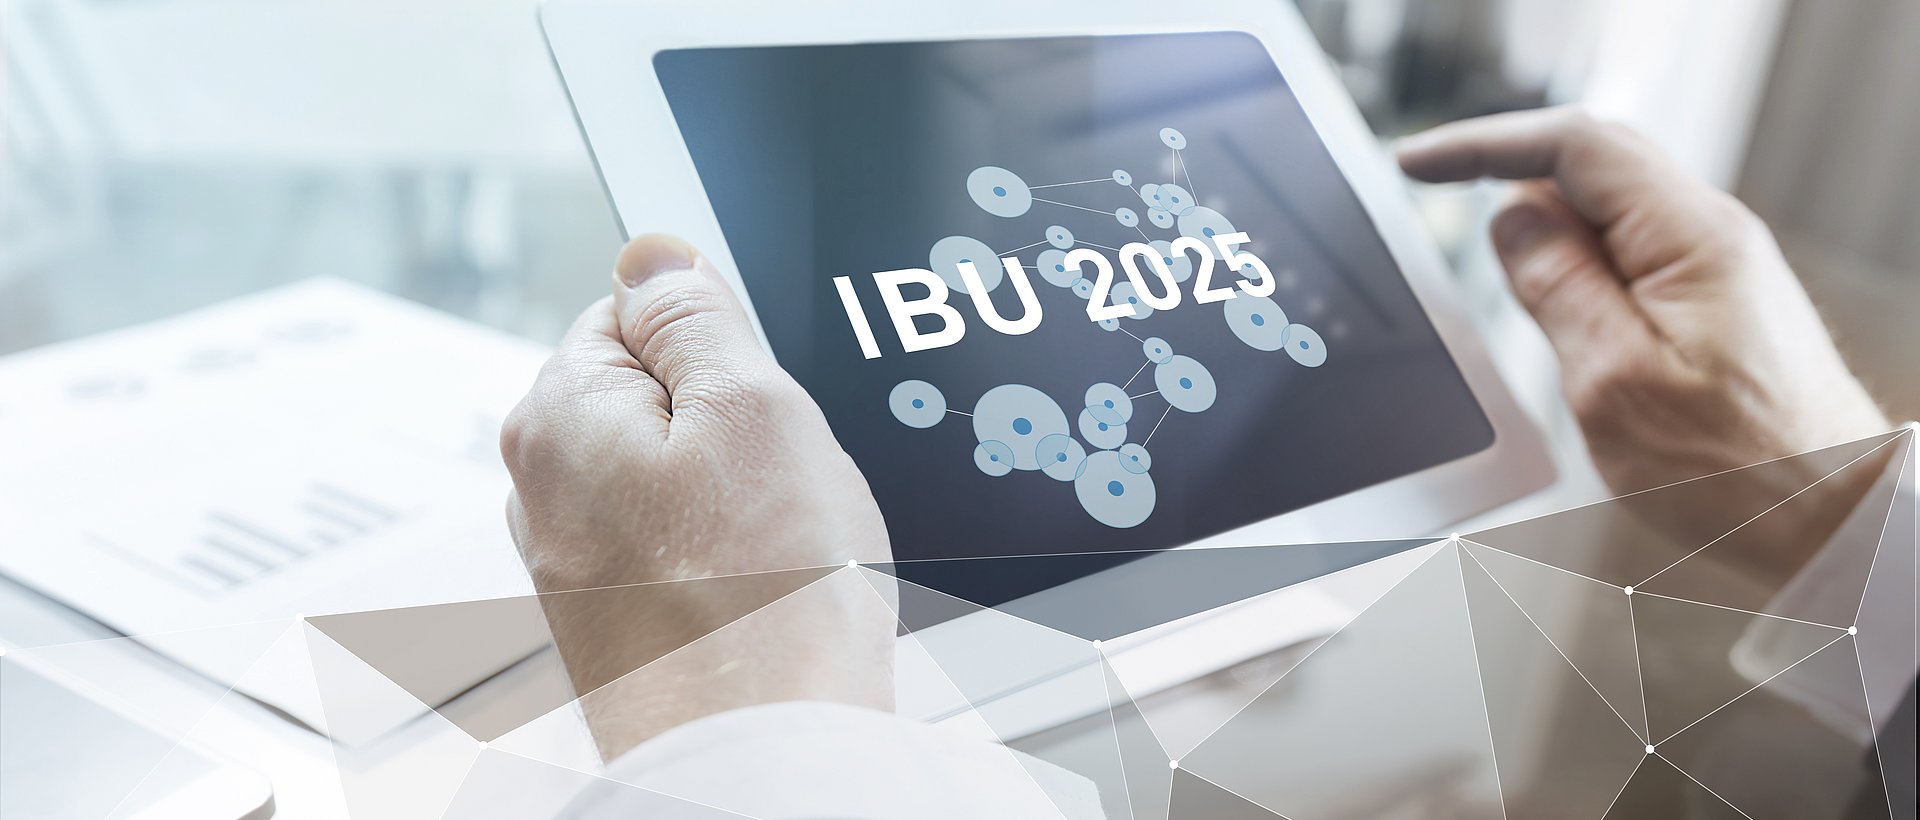 IBU-tec plan 2020 with smart tablet for investor relations